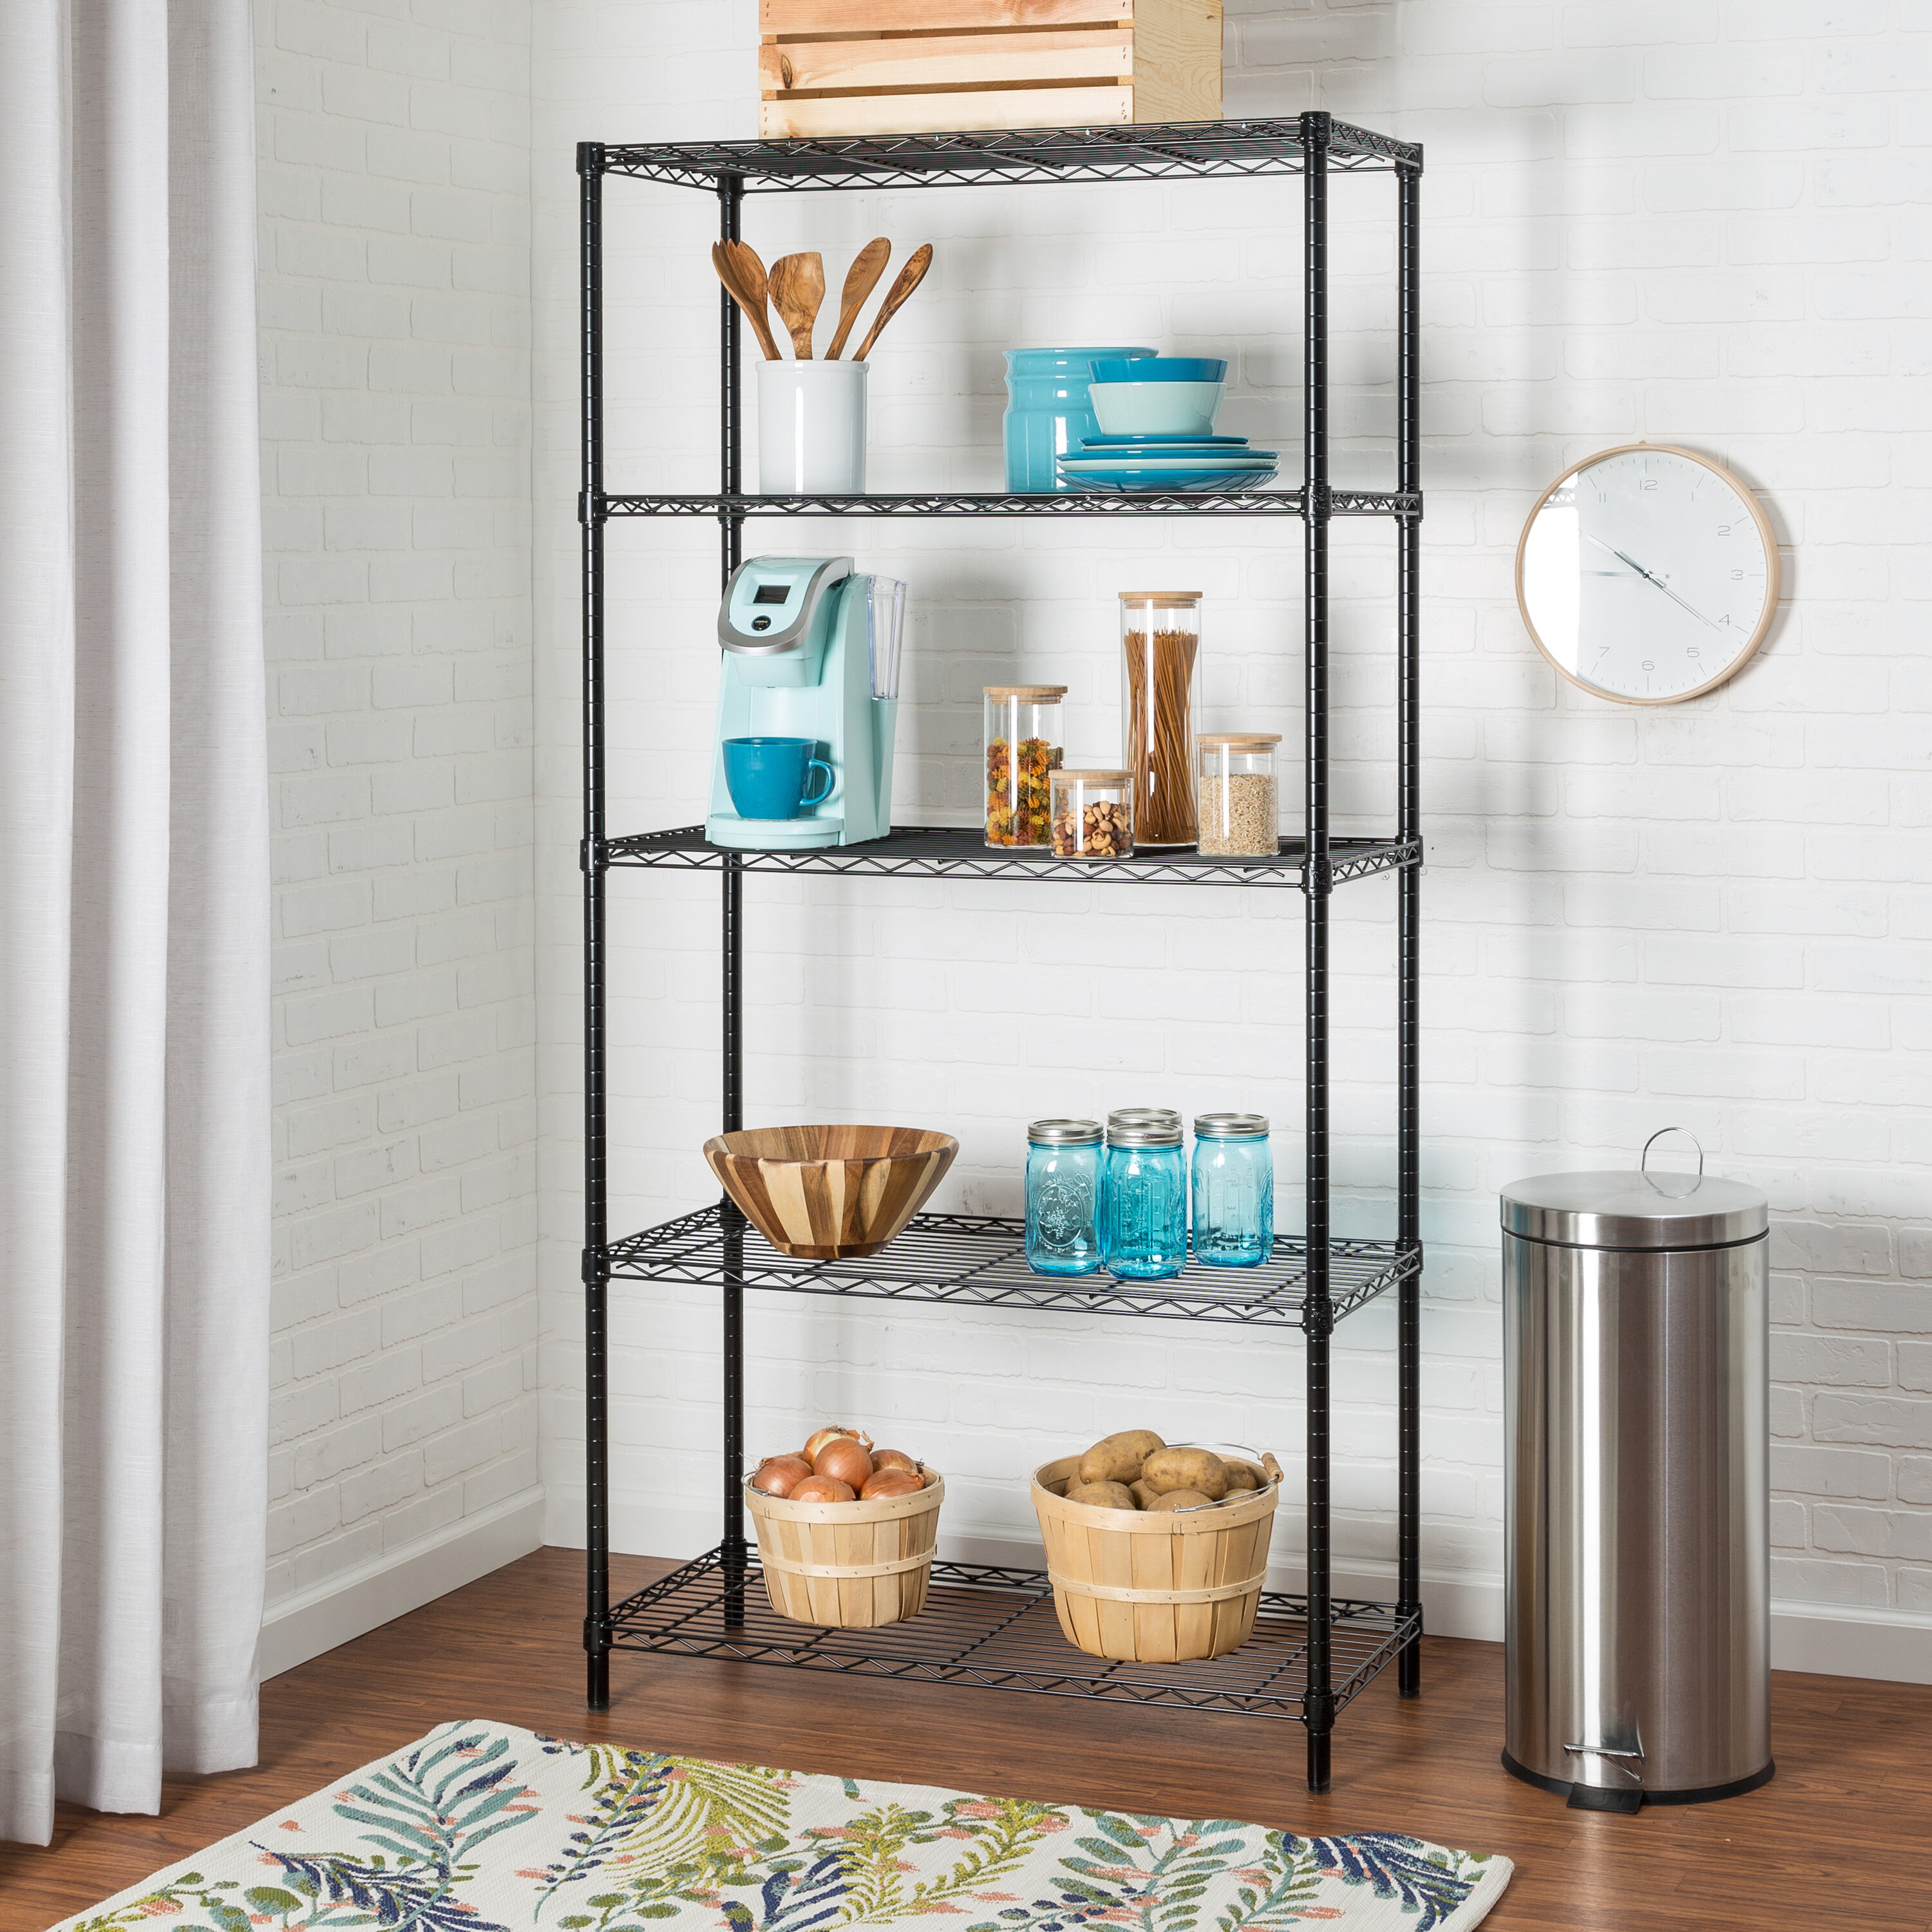 Details about   4-Tier Storage Rack Adjustable Organizer for Pantry Laundry Bathroom Kitchen New 